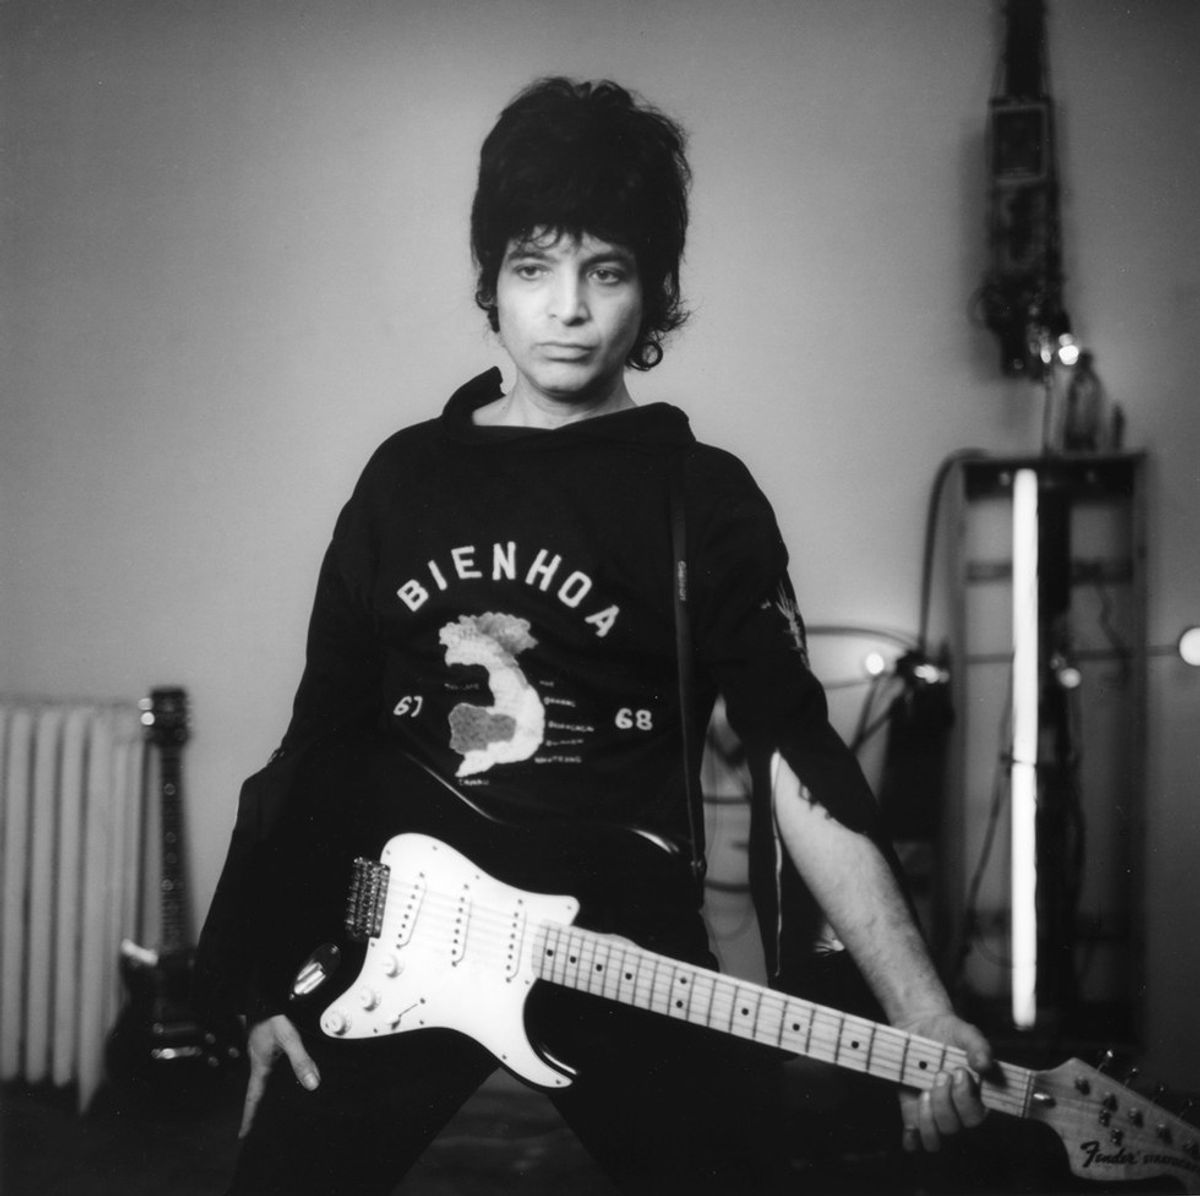 How Alan Vega Of Suicide Changed My View Of Music